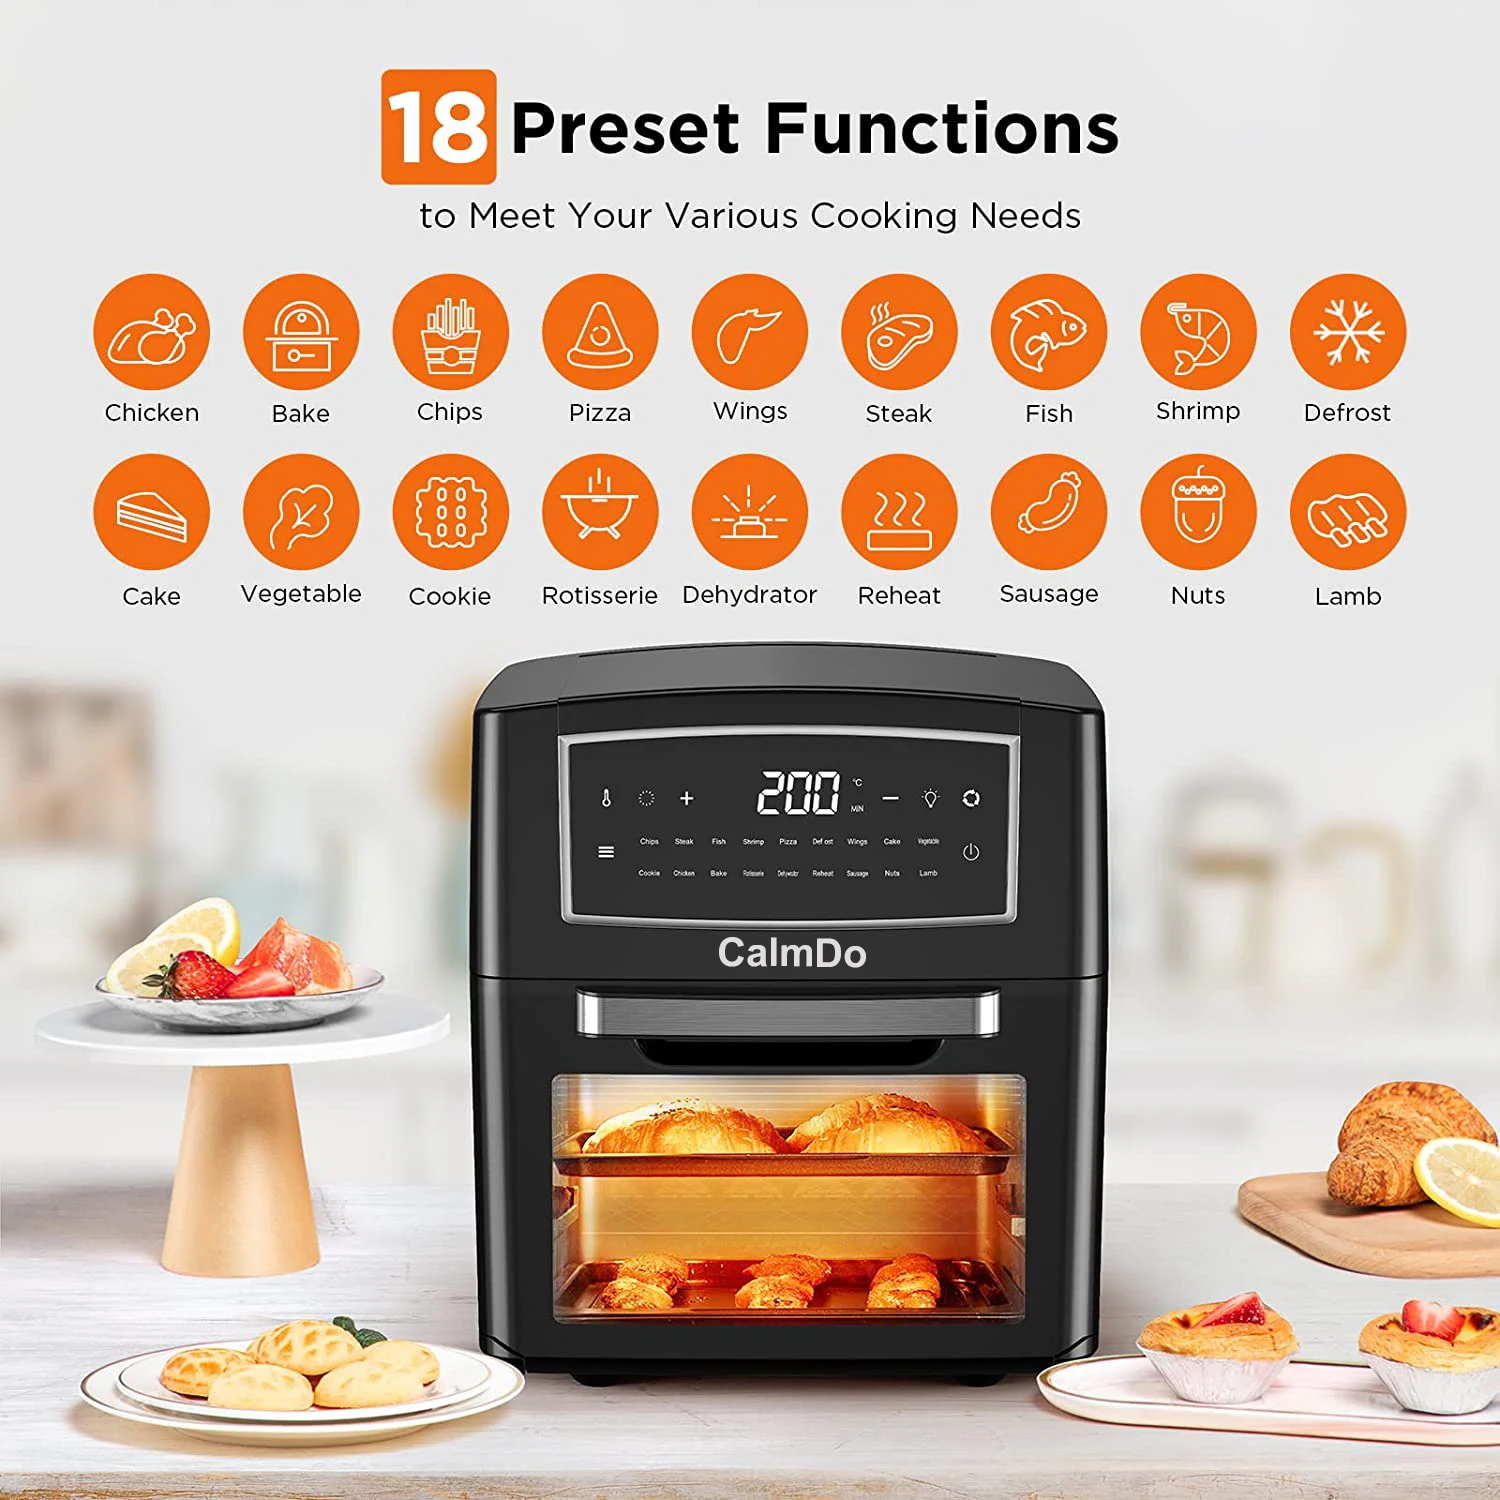 https://ae01.alicdn.com/kf/Sfd5ab18aca9c453c8821cad25204dd33s/CalmDo-1500W-Air-Fryer-Oven-Rotisserie-Dehydrator-12L-12-7QT-LED-Large-Capacity-Chicken-Frying-Oven.jpg